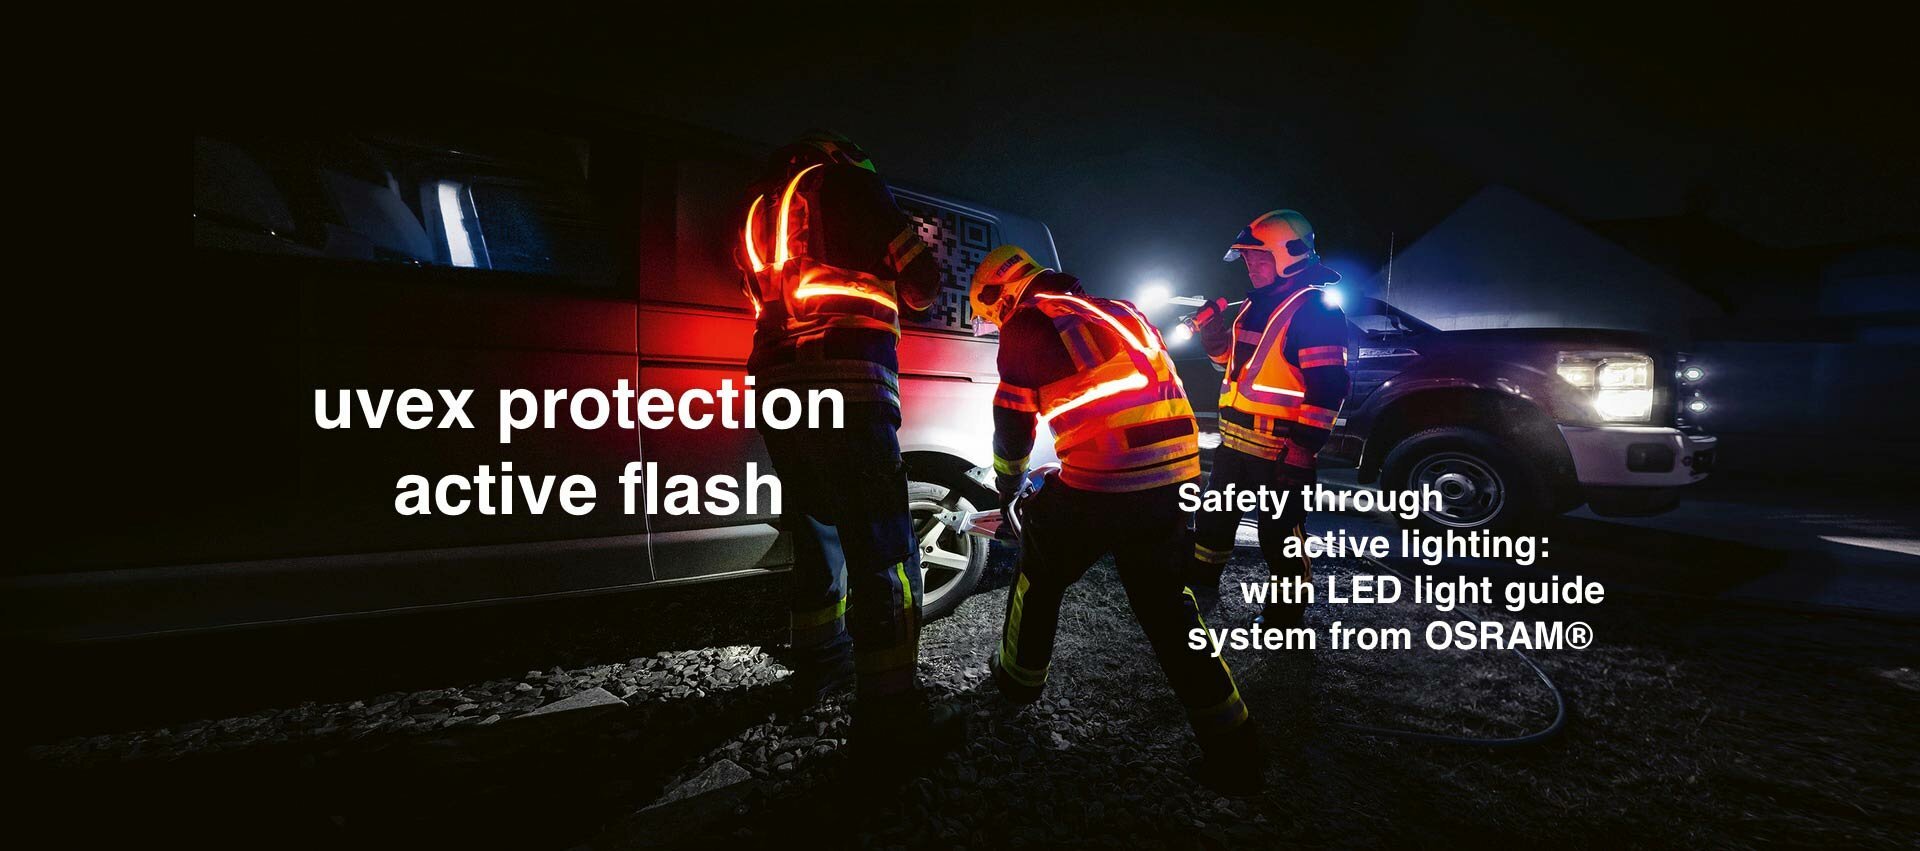 safety through active lighting for firefighting